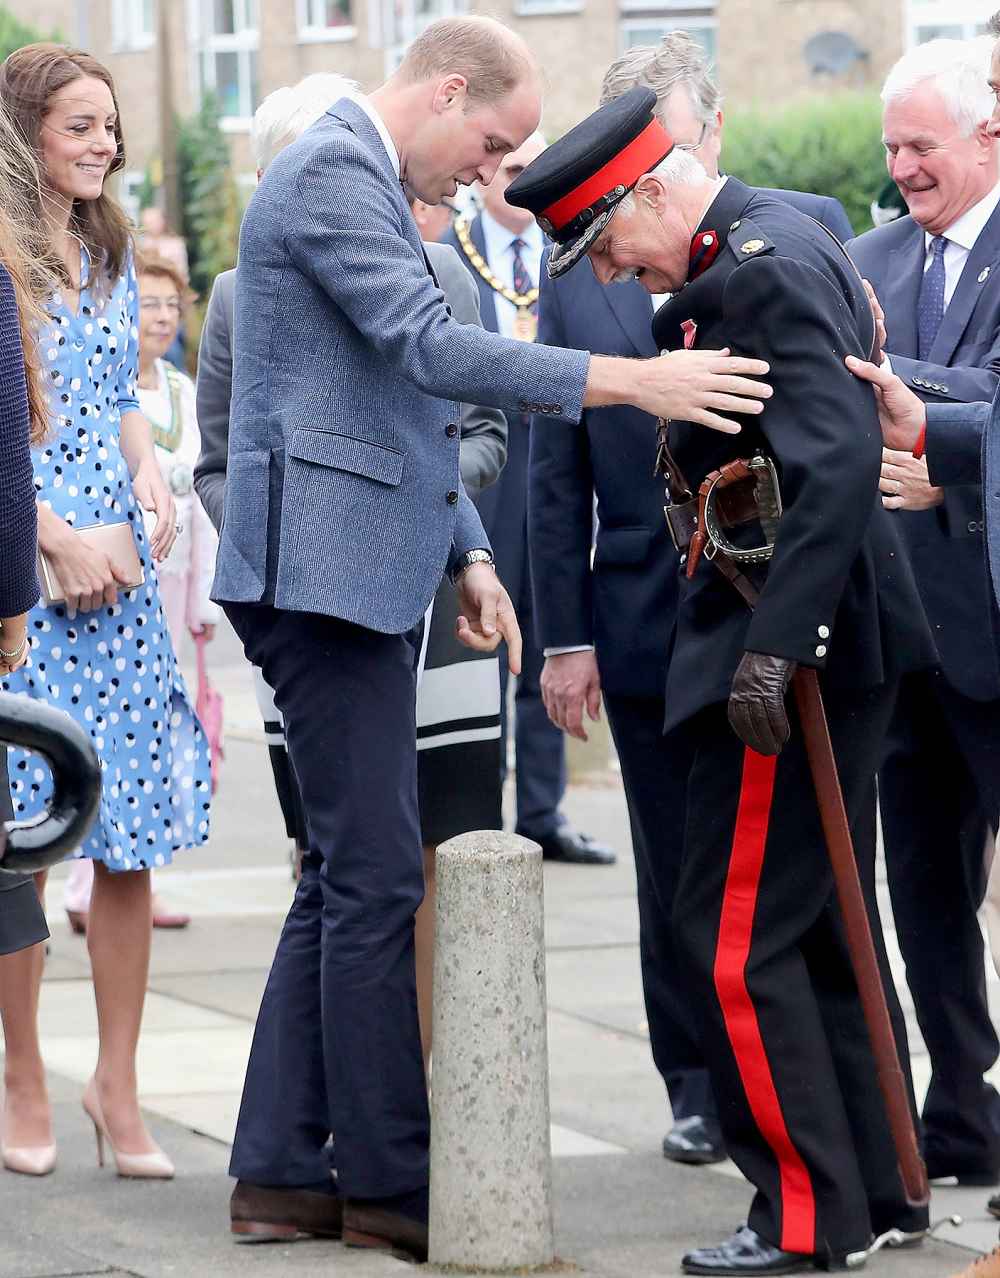 Catherine, Duchess of Cambridge looks on as Prince William, Duke of Cambridge rushes to helpVice Lord Lieutenant of Essex Jonathon Douglas-Hughes who fell backwards over a bollard as they arrive at Steward's Academy on September 16, 2016 in Harlow, England.